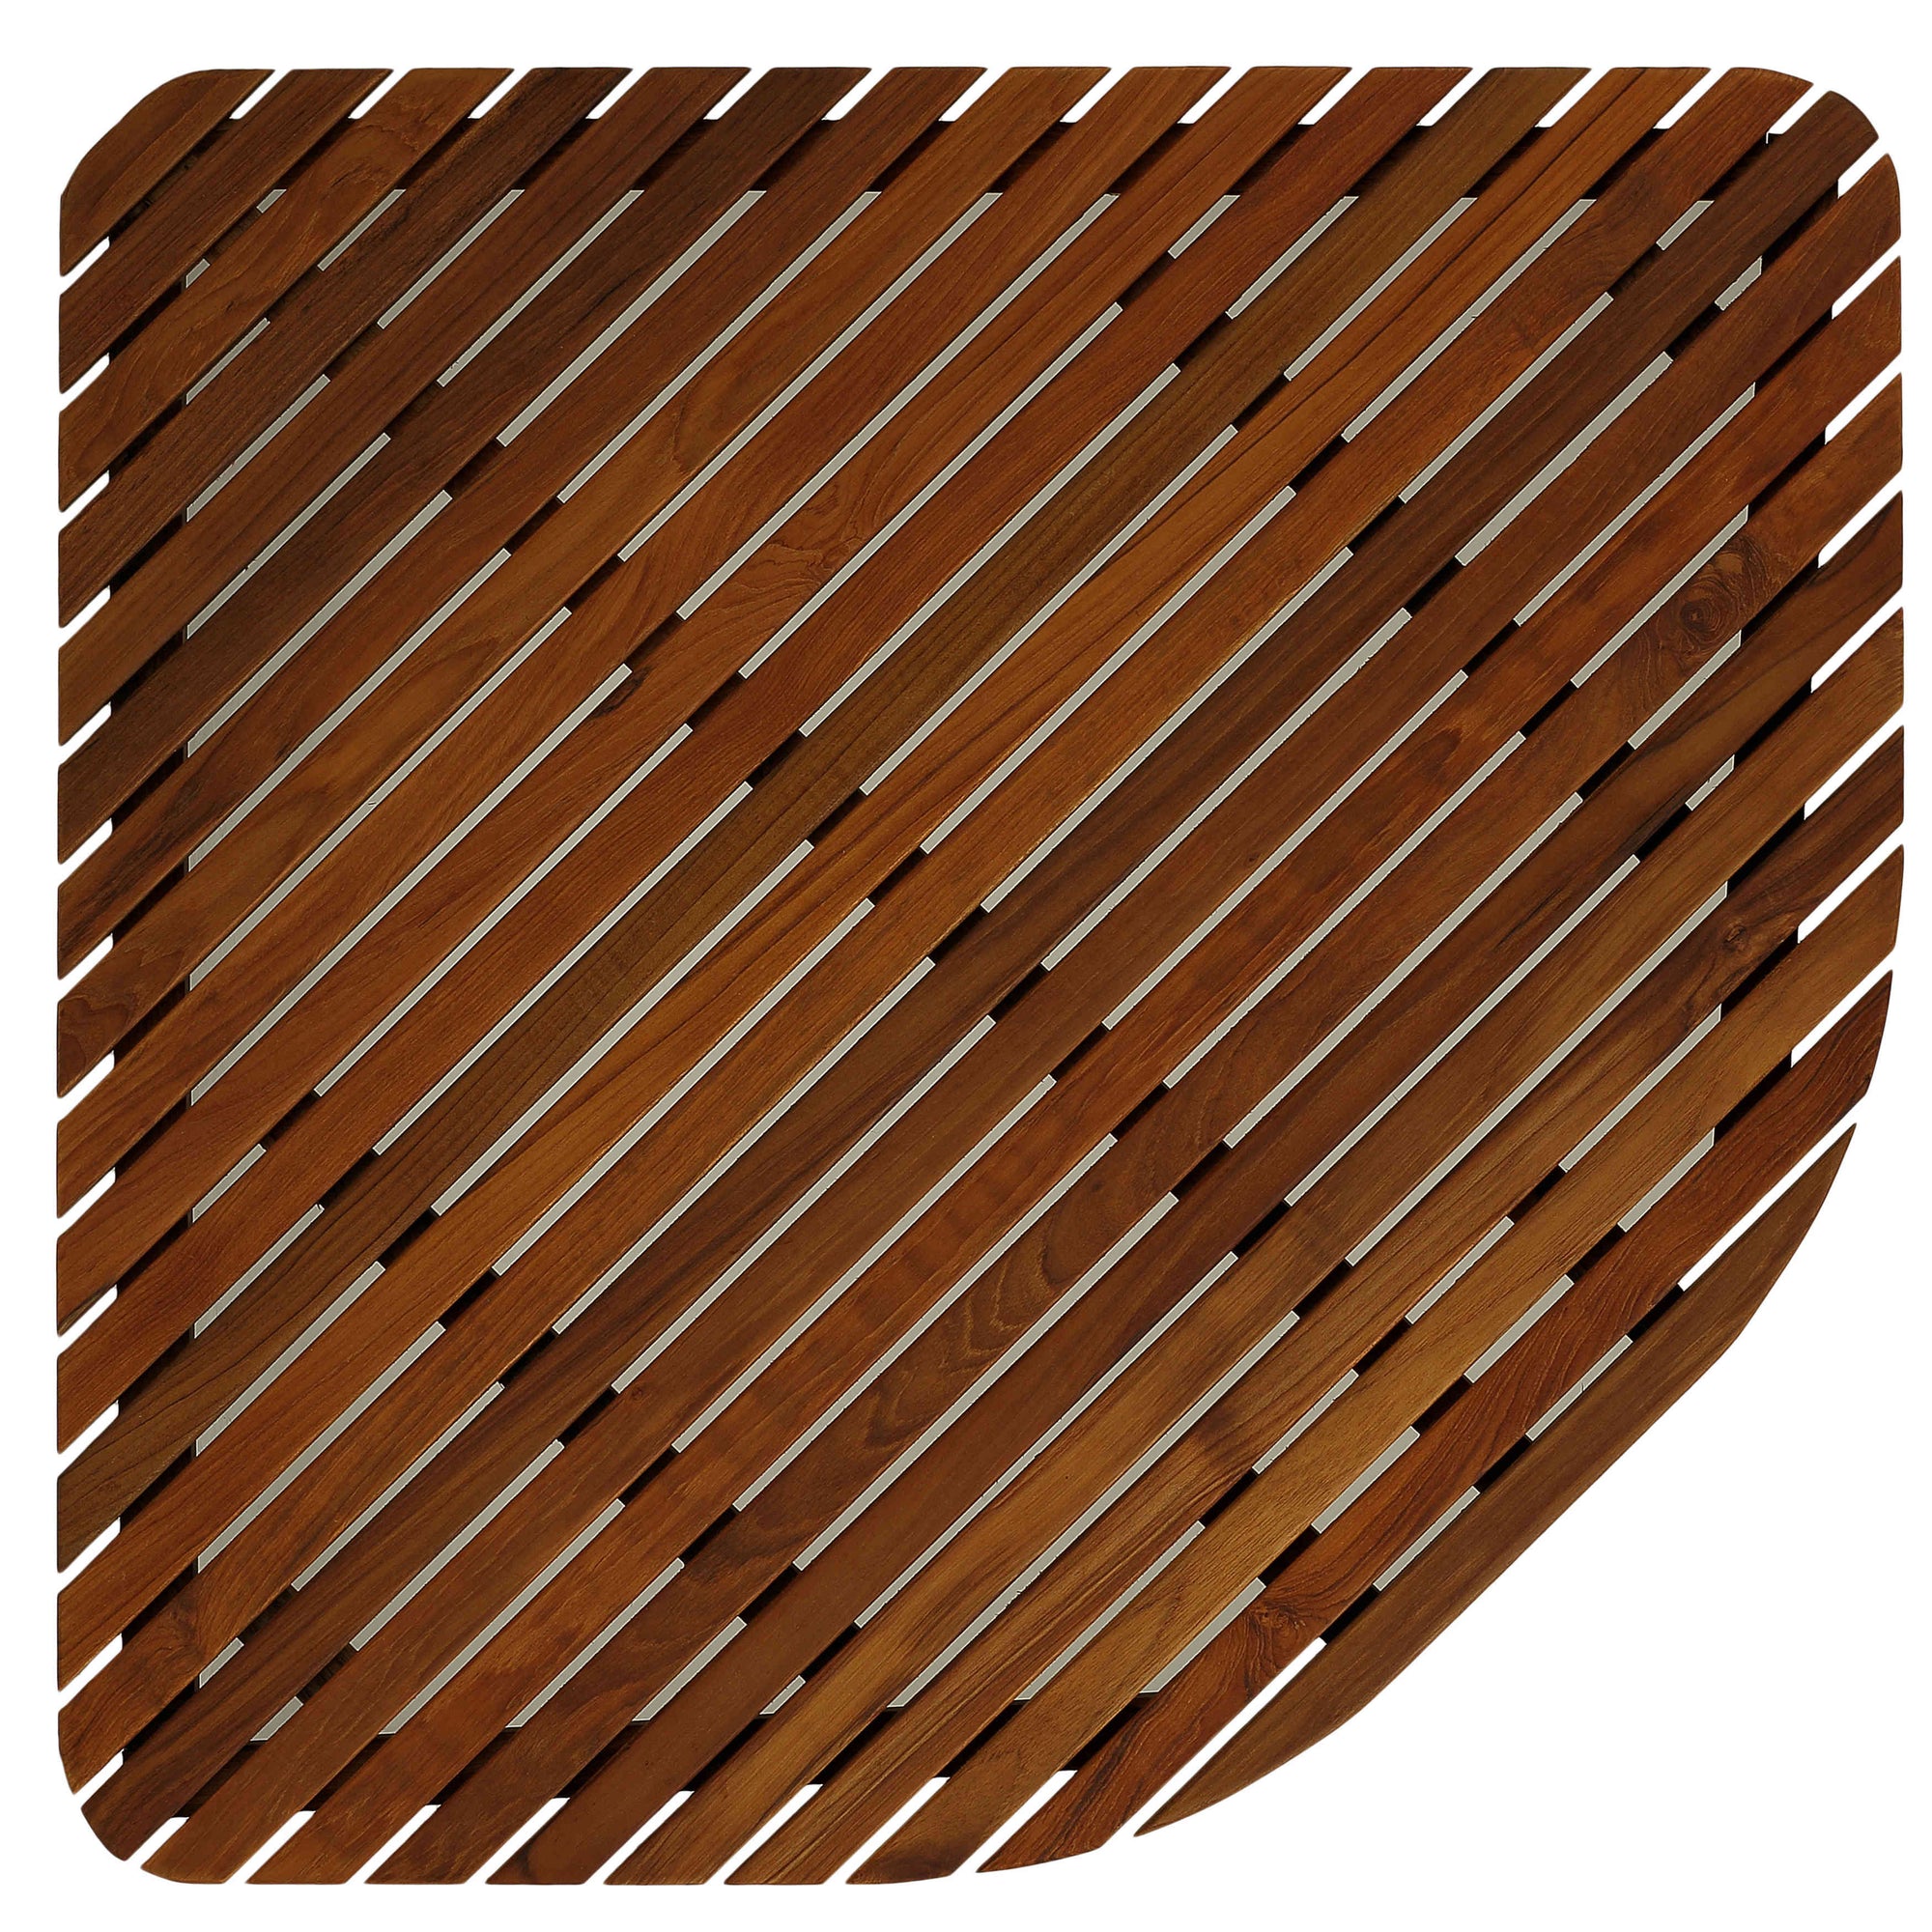 Bare Decor Erika Corner Shower Spa Mat in Solid Teak Wood and Oiled Finish, X-Large, 30" x 30"